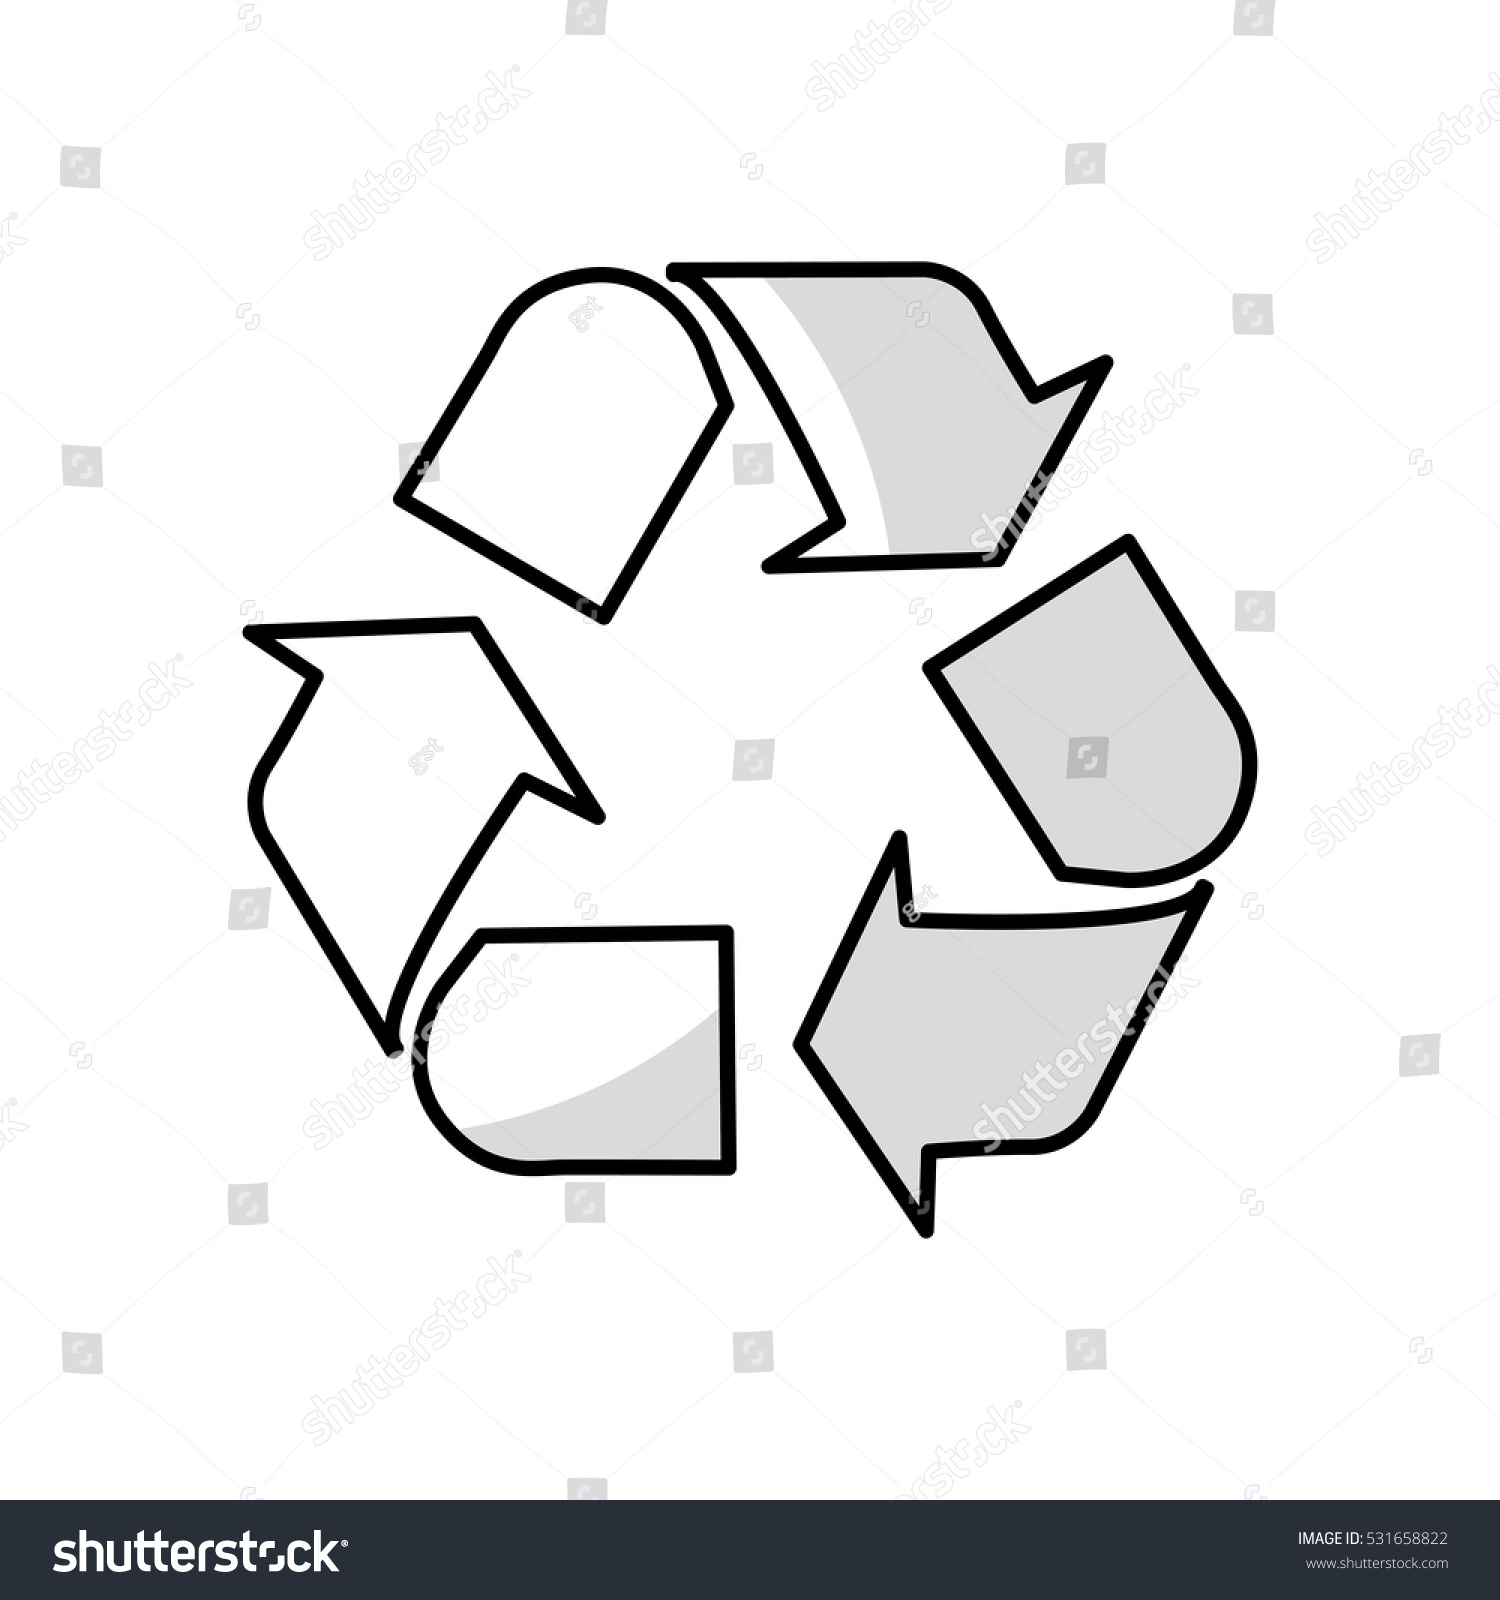 arrows recycle symbol isolated icon vector illustration design #531658822